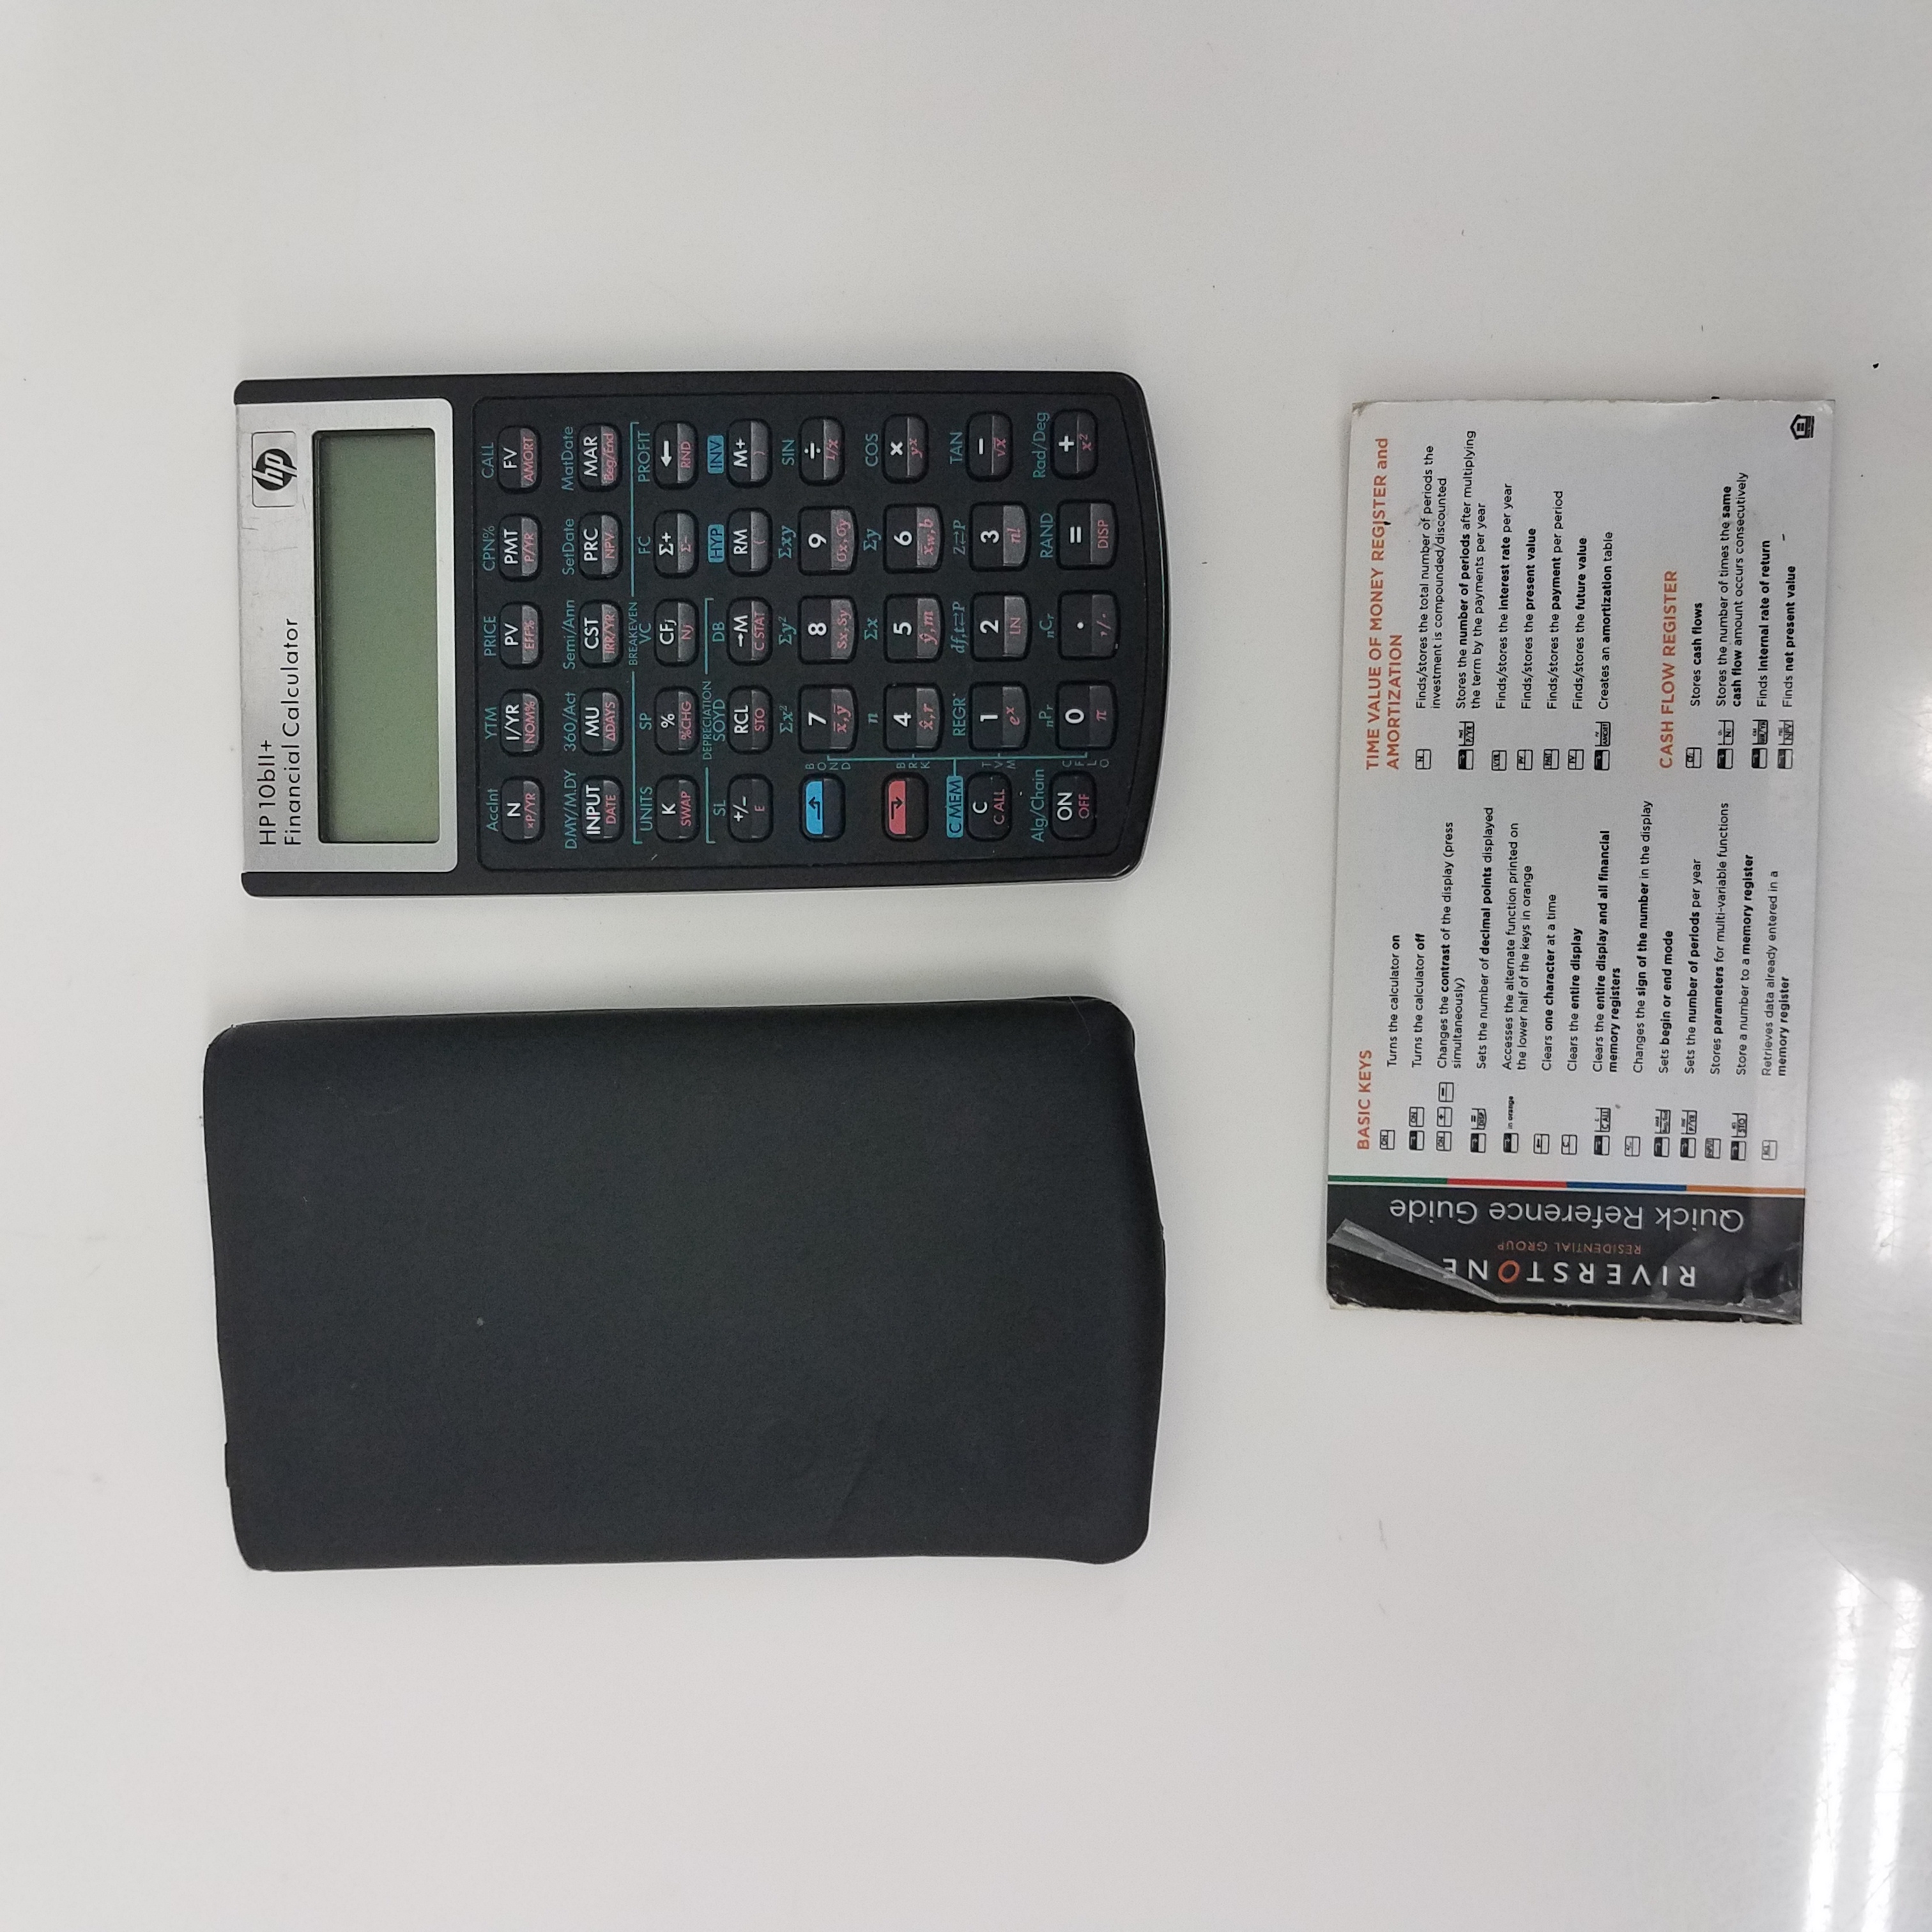 Buy the Vintage HP 10BII+ 10bll Plus Financial Calculator With Black Sleeve  Untested GoodwillFinds